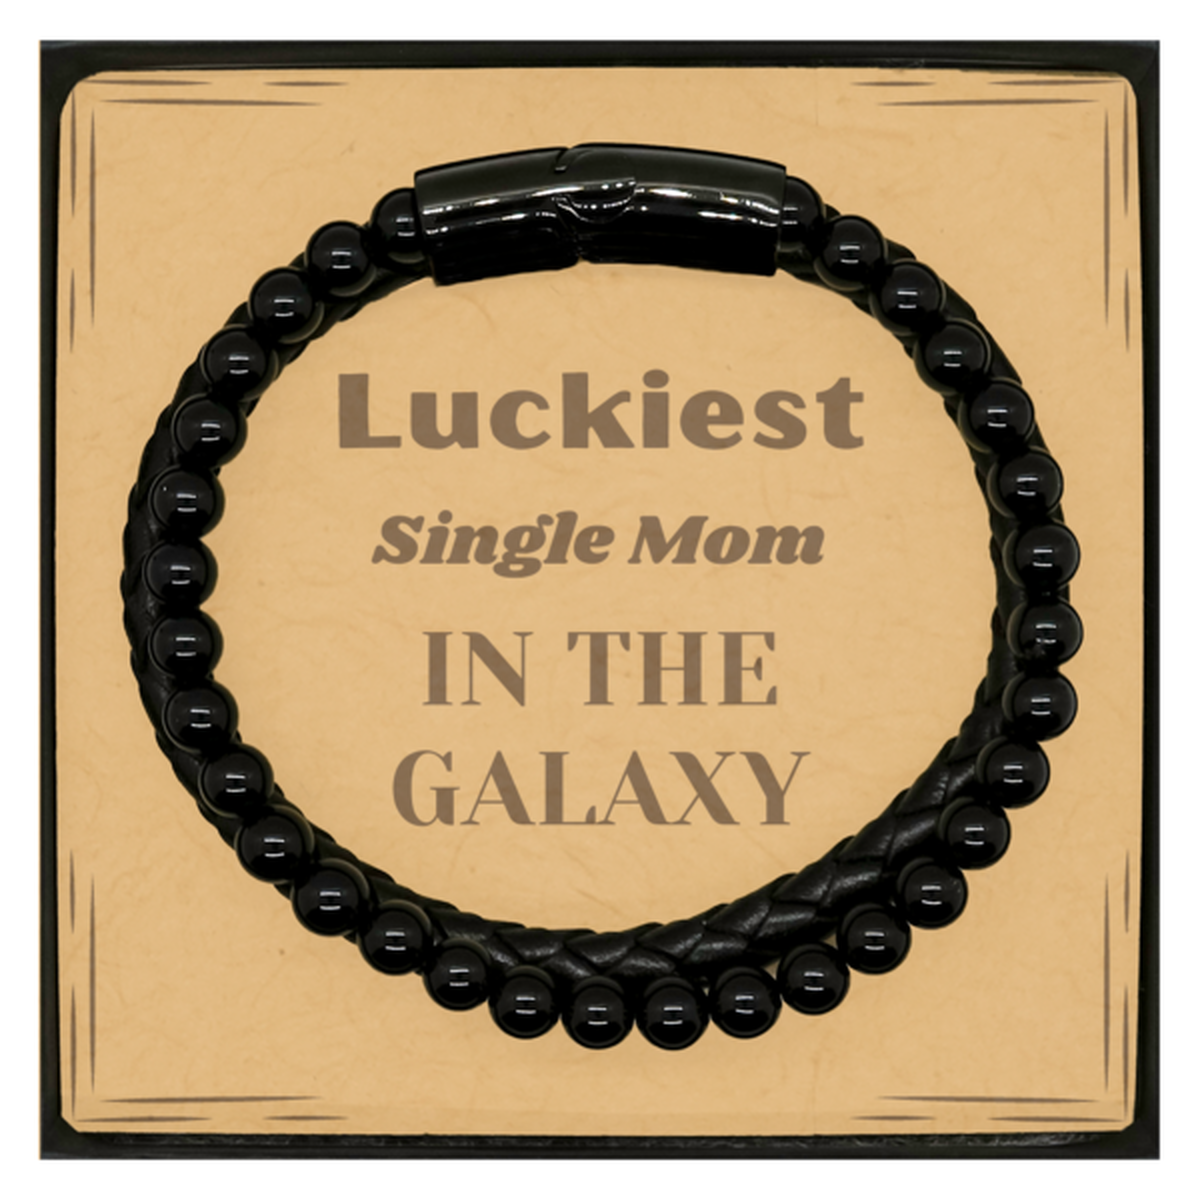 Luckiest Single Mom in the Galaxy, To My Single Mom Message Card Gifts, Christmas Single Mom Stone Leather Bracelets Gifts, X-mas Birthday Unique Gifts For Single Mom Men Women